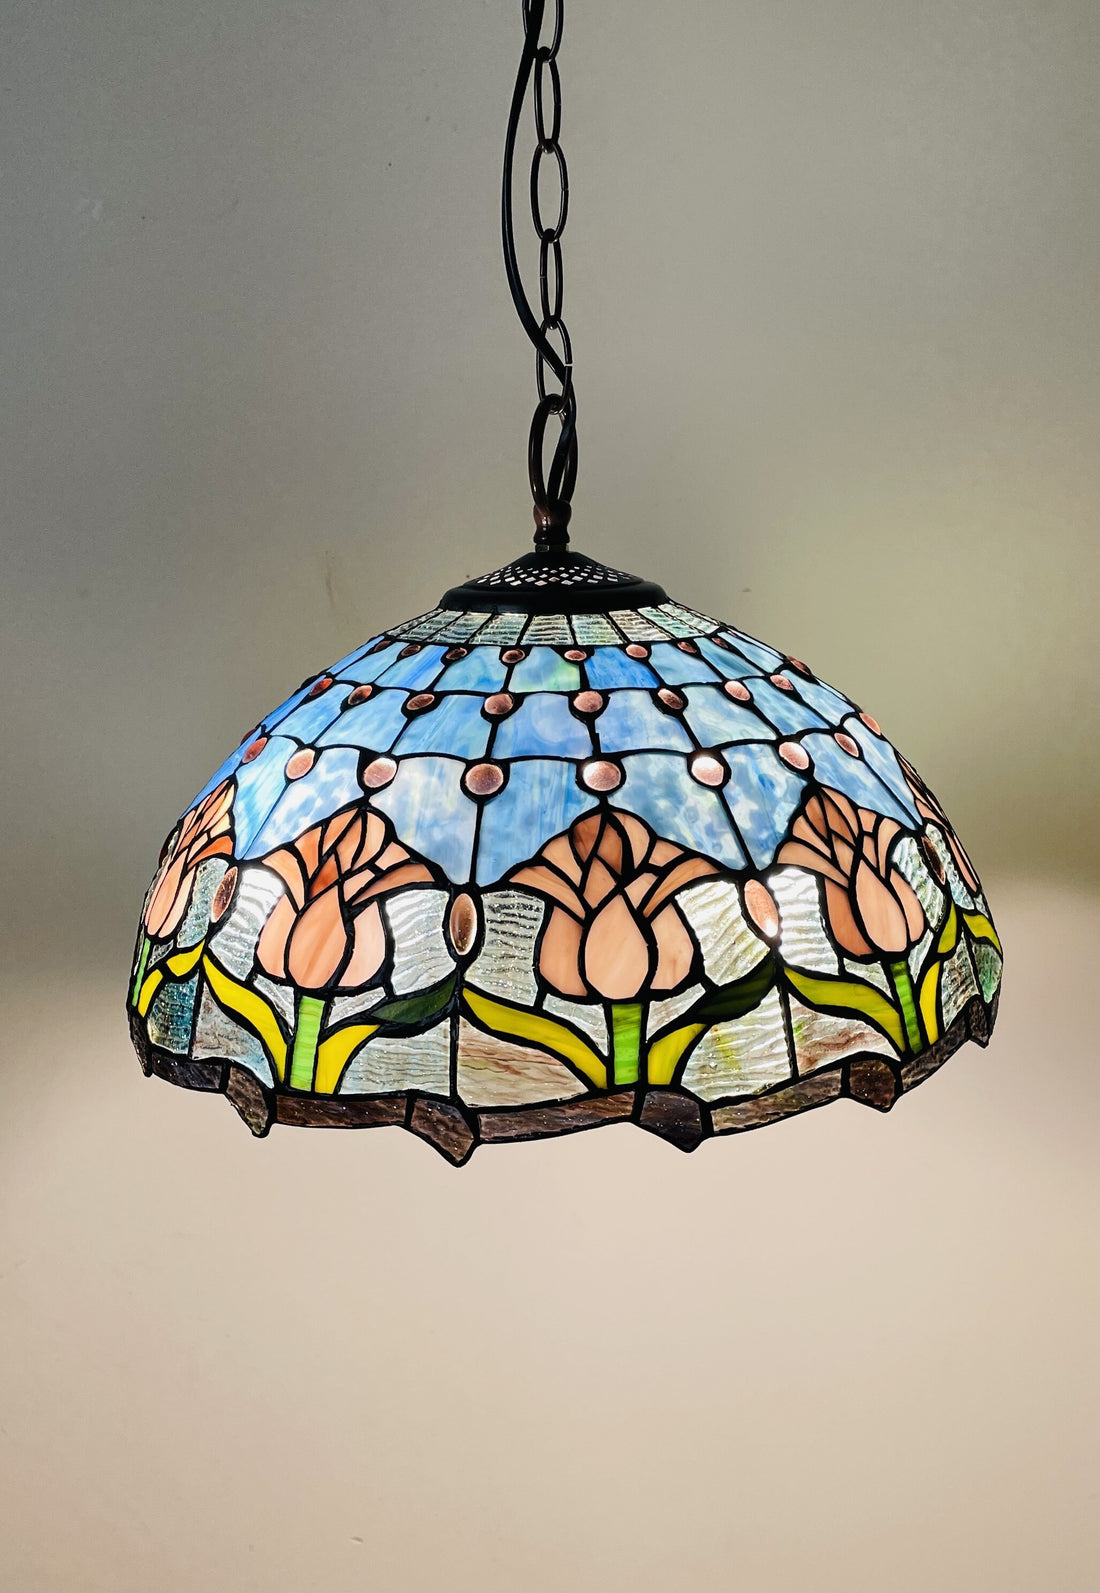 Tulips Tiffany Hanging Lamp 16in, Leadglass Stained Glass Shade, Crystal Bead Lampshade, Chandelier, Pendant Light, Living Room Kitchen Lamp